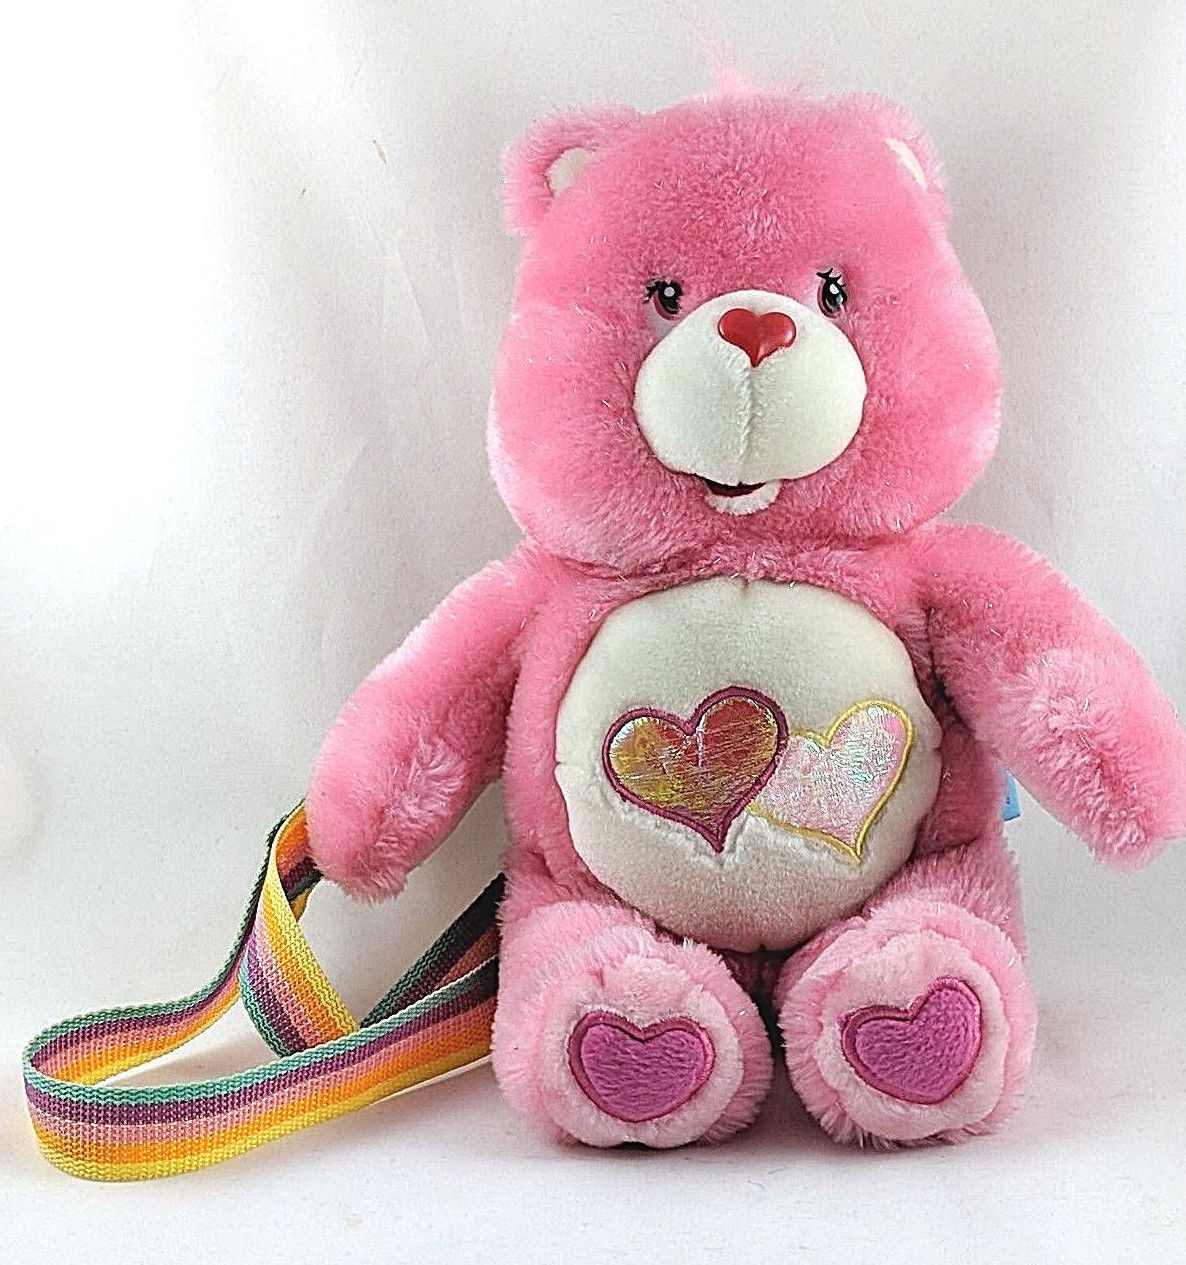 Care Bears Backpack Plush Love-A-Lot Bear 2002 Pink Sparkly 13